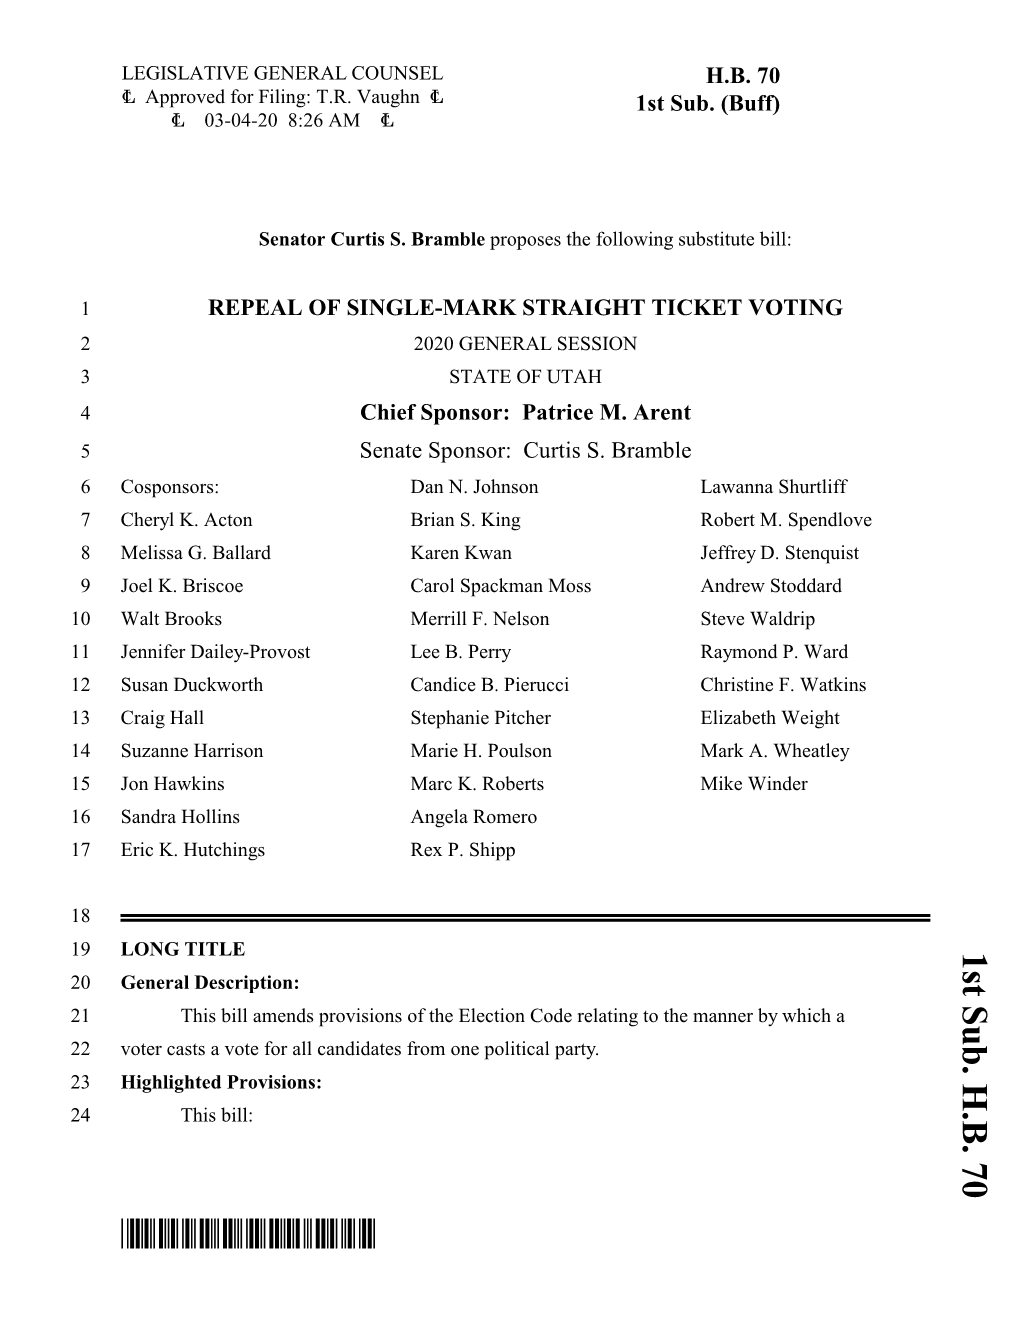 HB0070S01* G Voter Casts a Vote for All Candidates from One Political Party Highlighted P LONG Craig Suz J Sandra Hollins Eric K